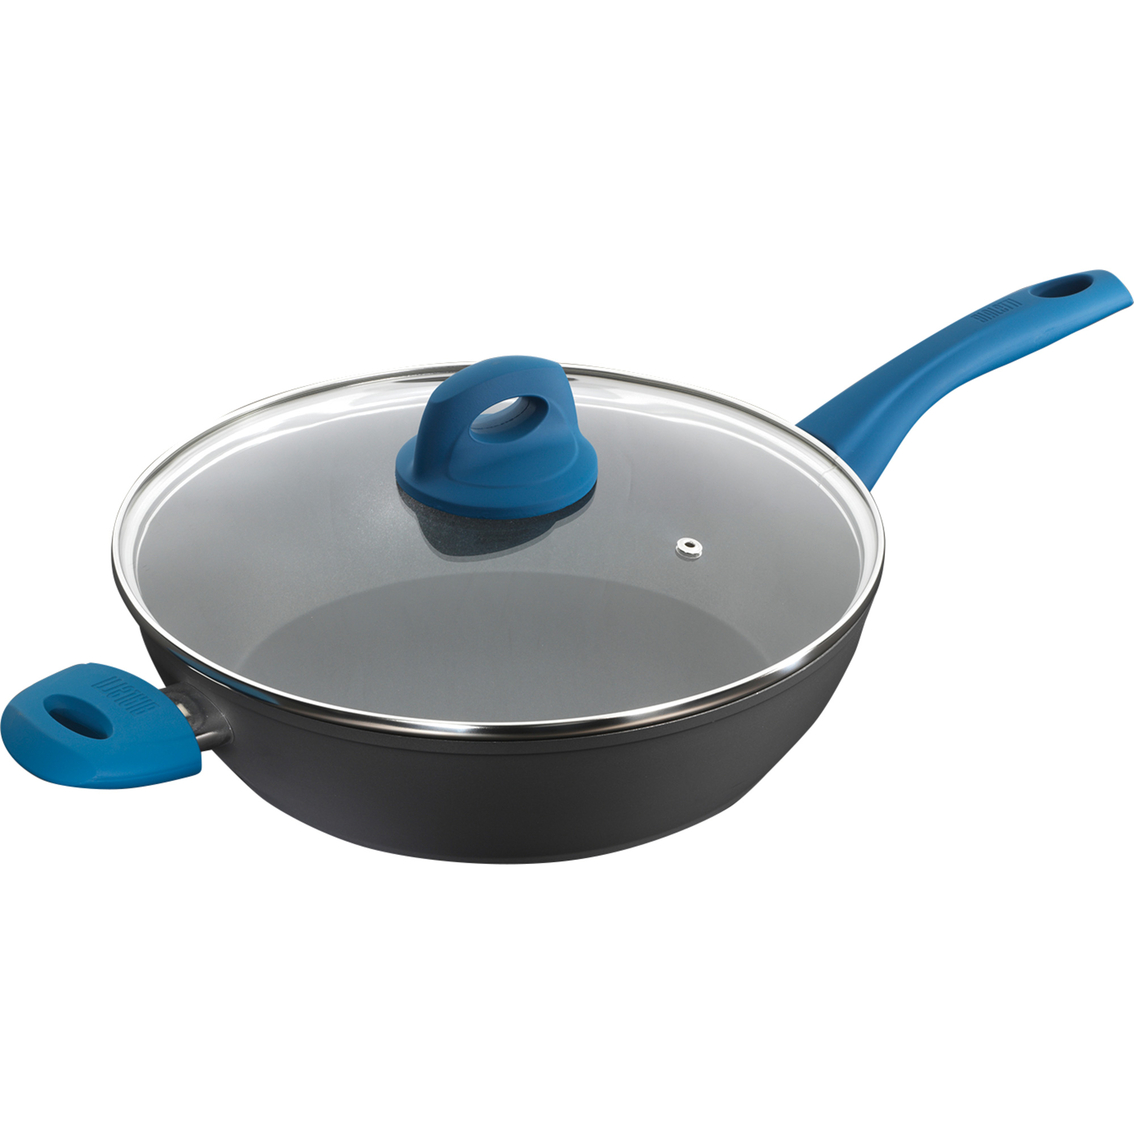 Bialetti Simply Italian 11 In. Nonstick Covered Deep Saute Pan | Fry ...